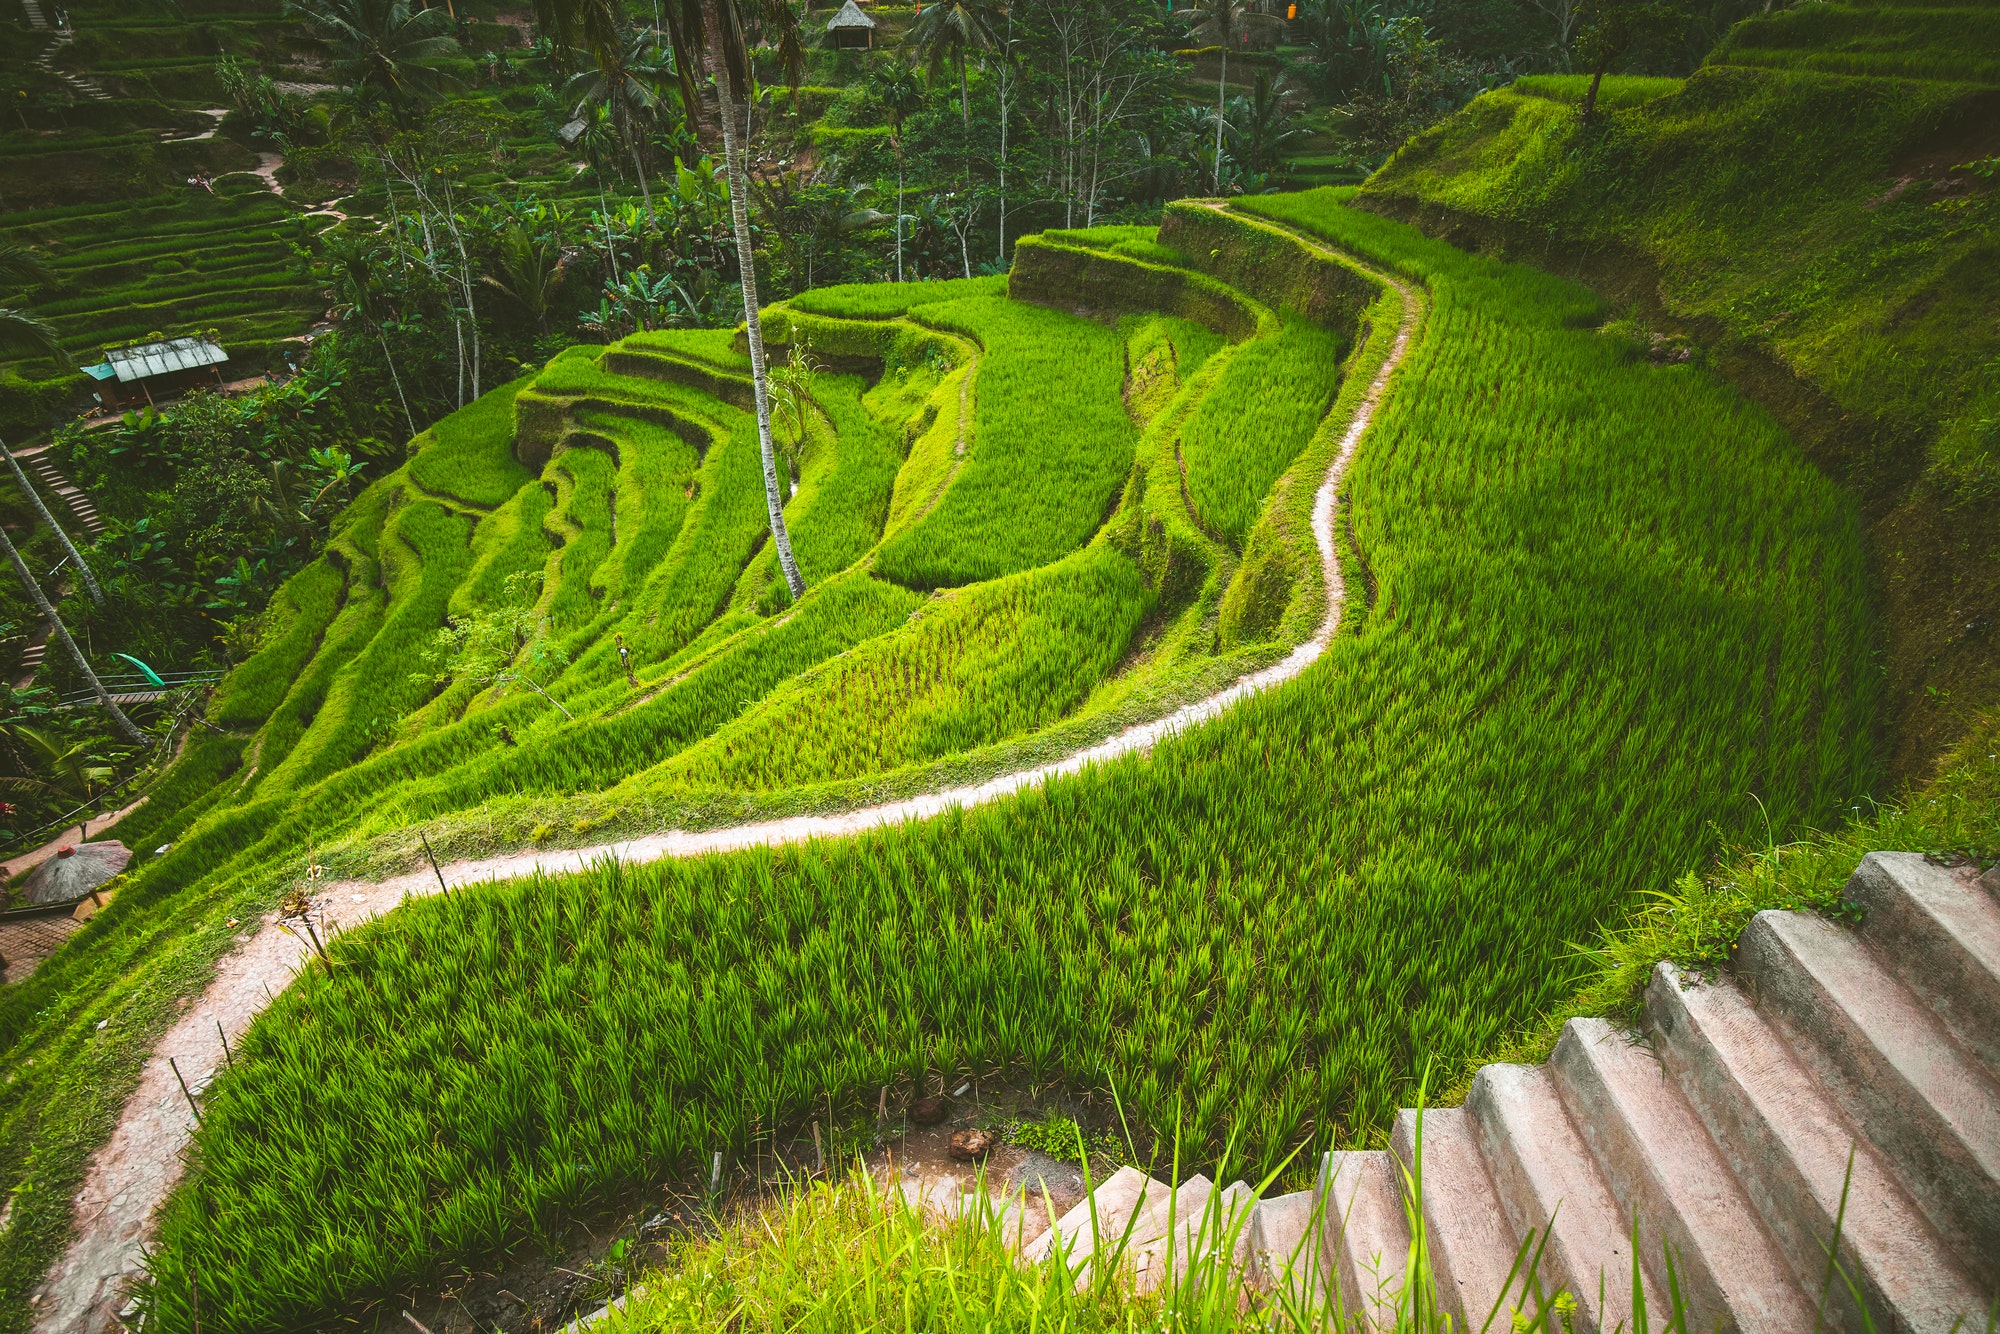 Tegalalang rice terrace in the Ubud, Bali